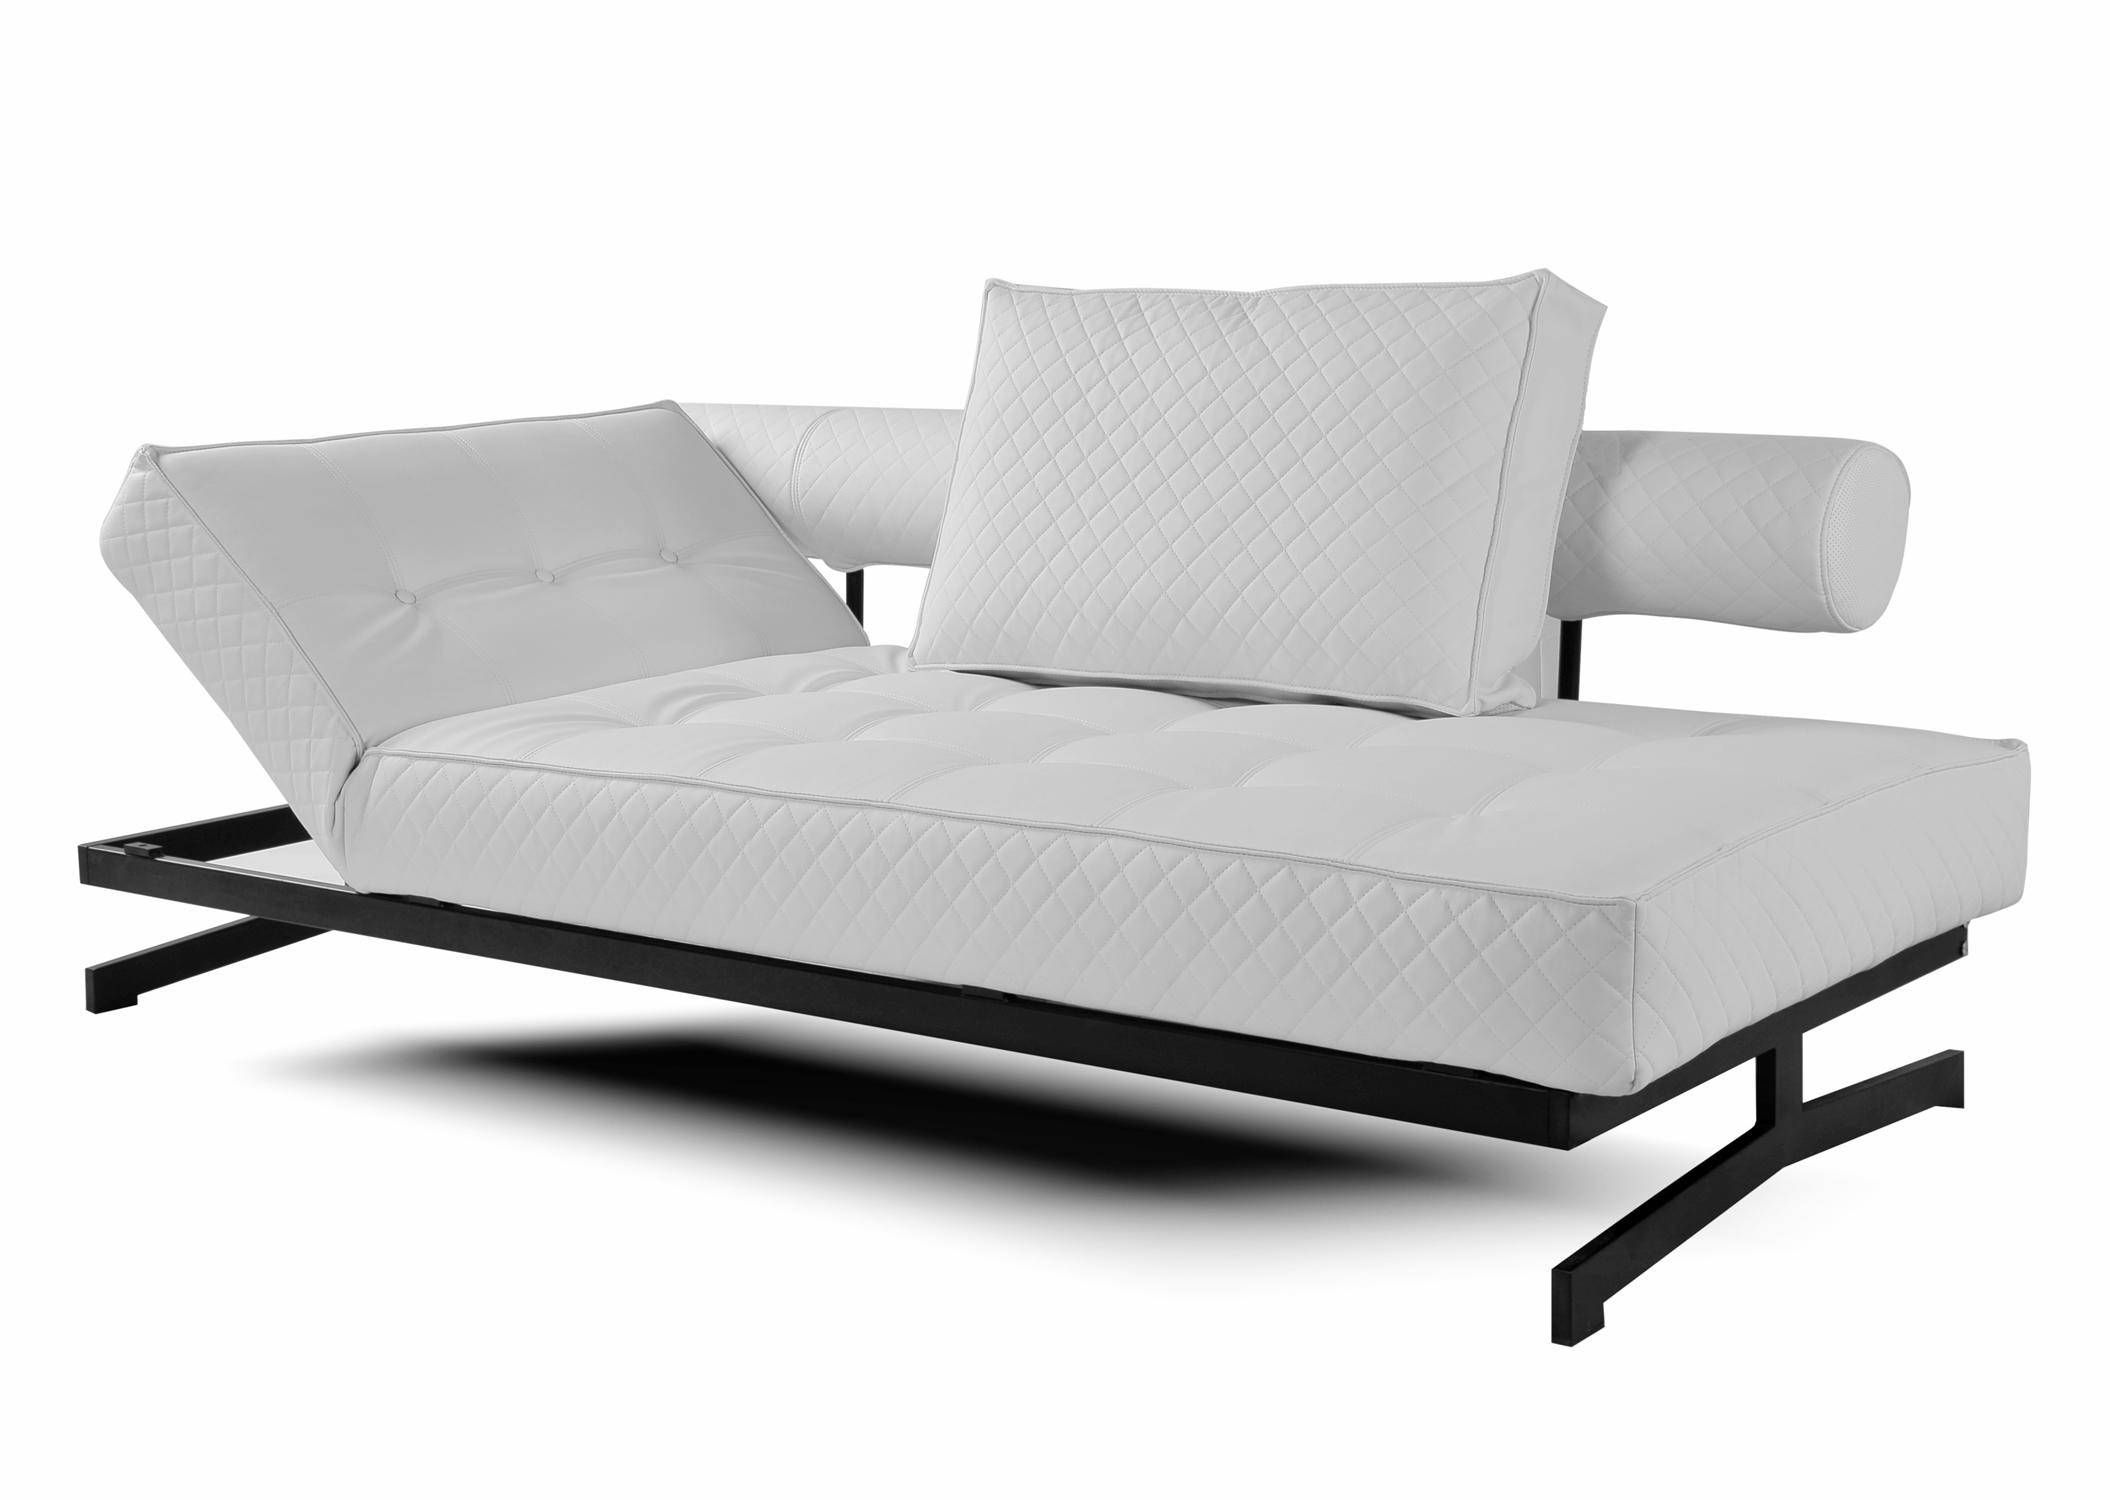 lounger sofa bed with wood frame